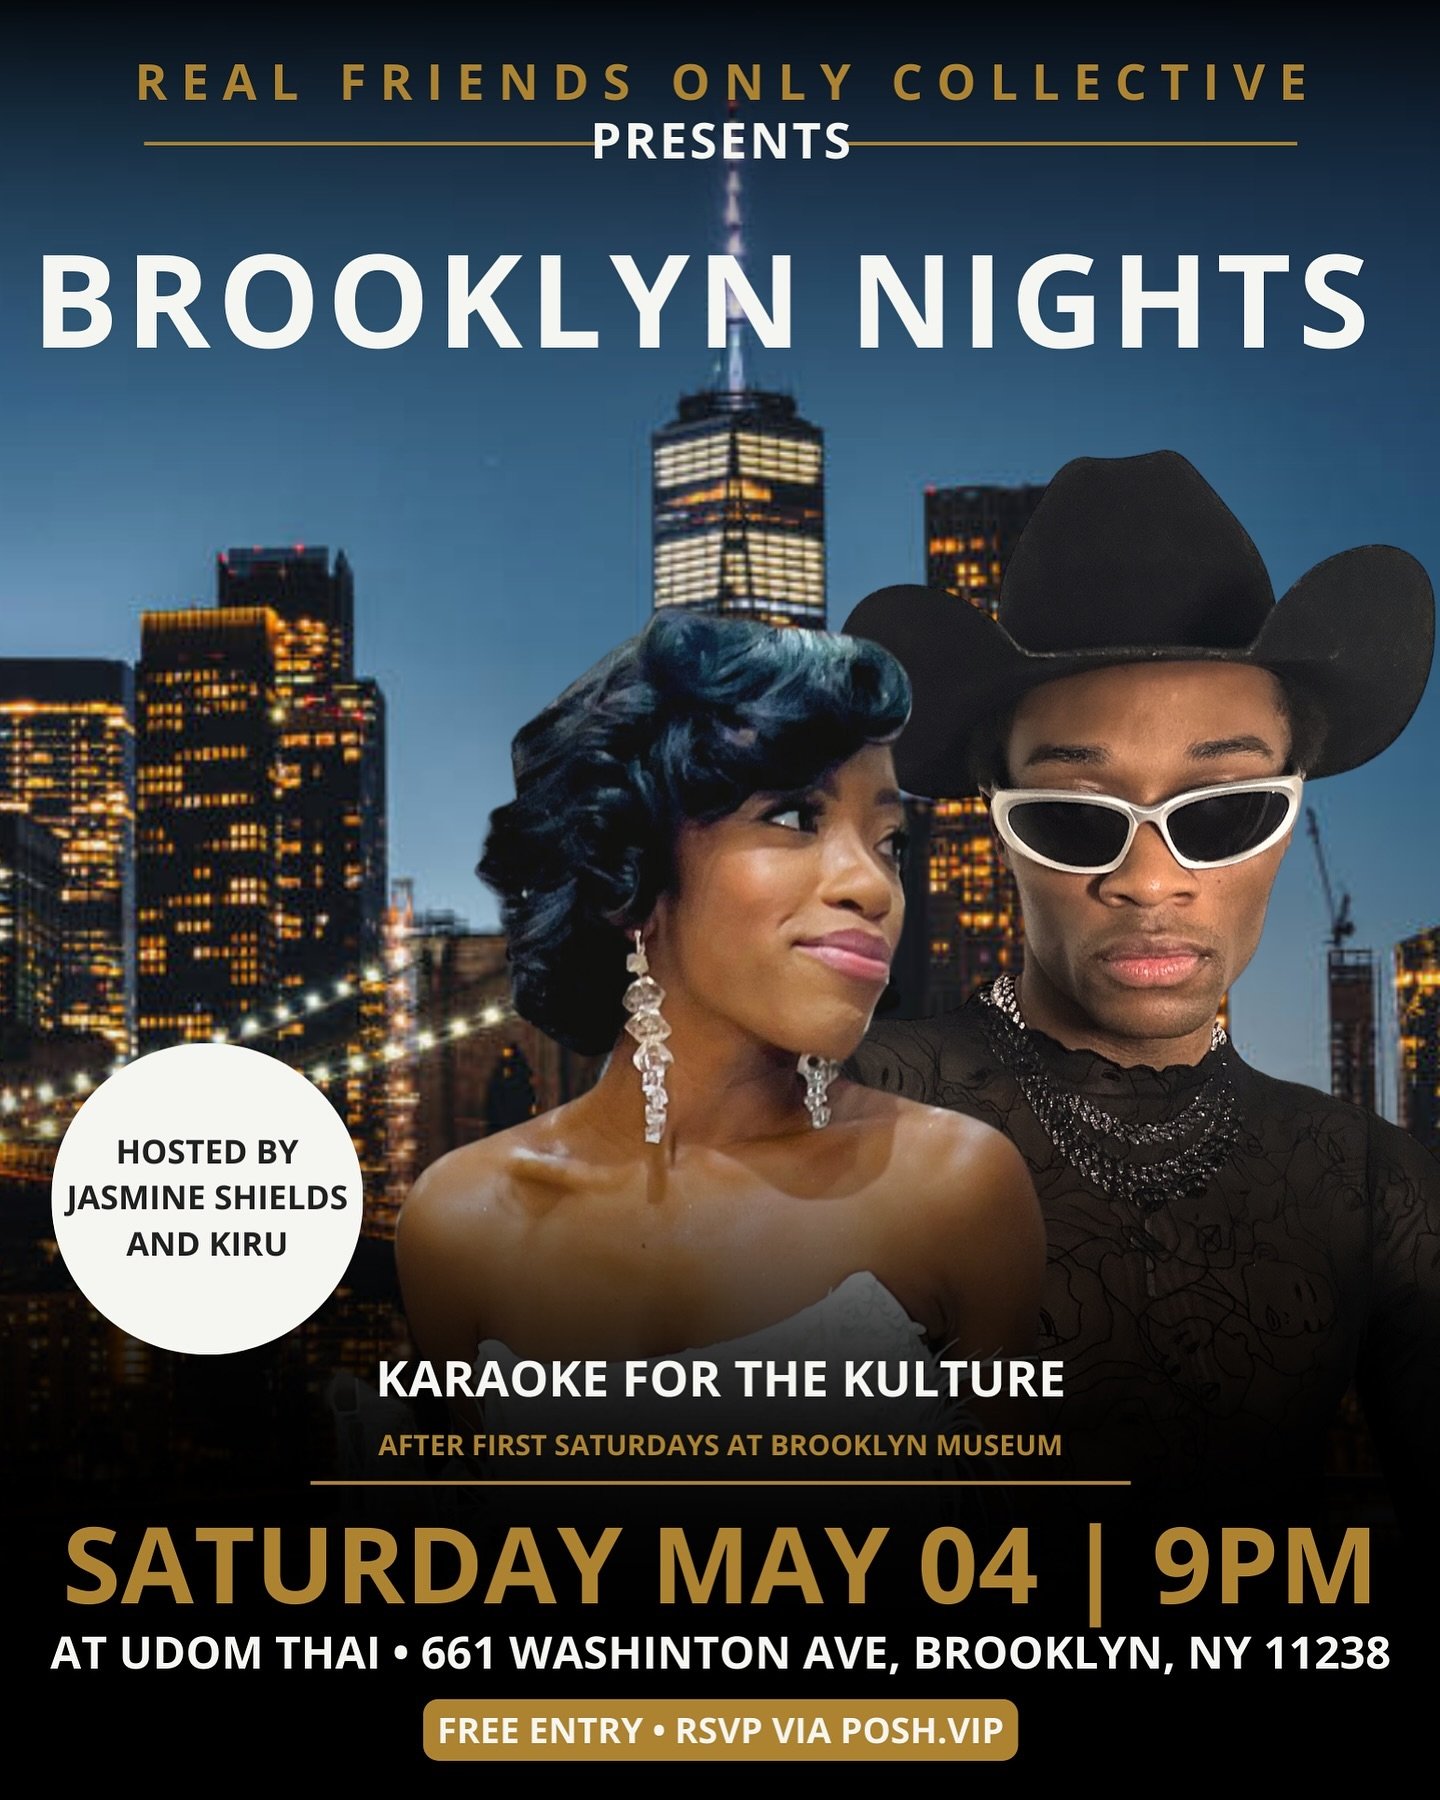 Looking for some fun on a Saturday night? Food and drinks after First Saturdays at Brooklyn Museum? The perfect opportunity to run in the new season and meet some dope folk? 

Pull up to Brooklyn Nights: Karaoke for the Kulture on May 04, 2024. 🤓🎤
